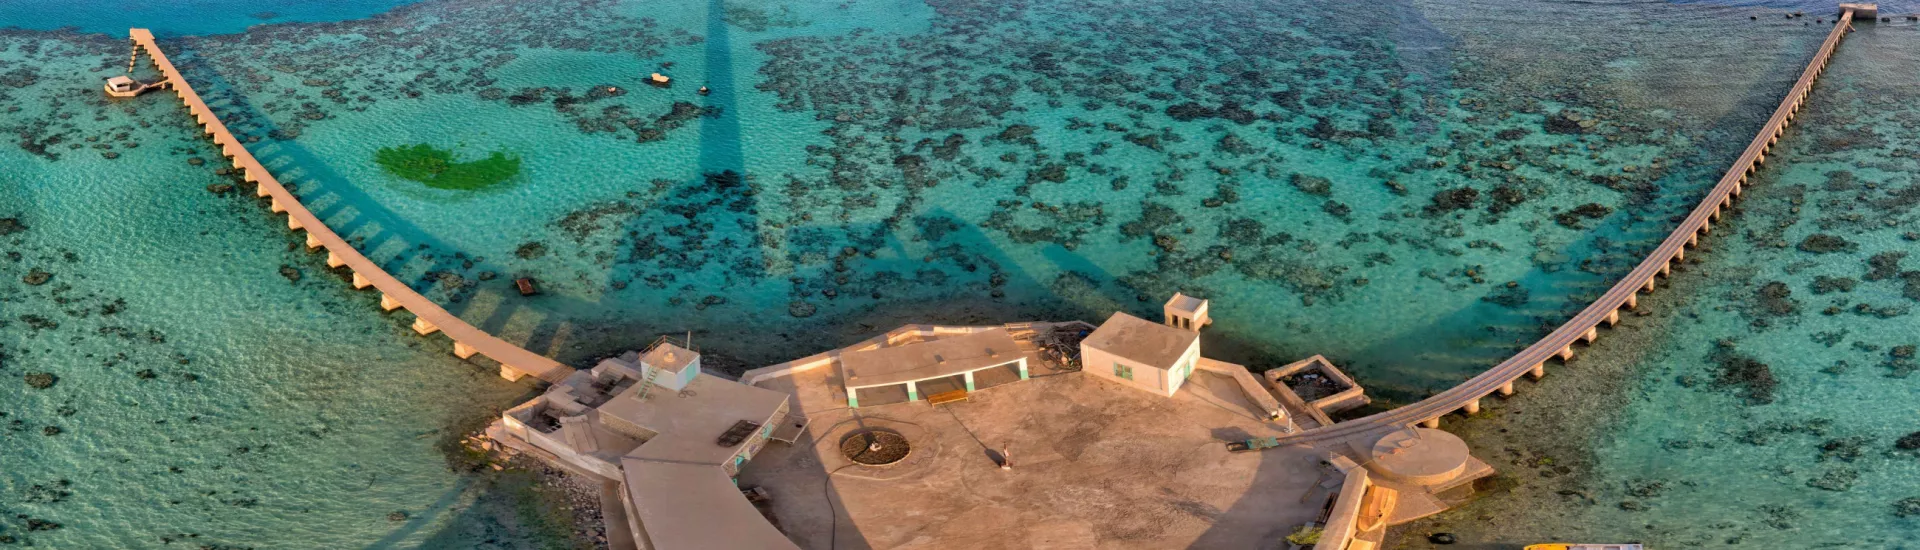 A view of the reef in Sudan, Africa